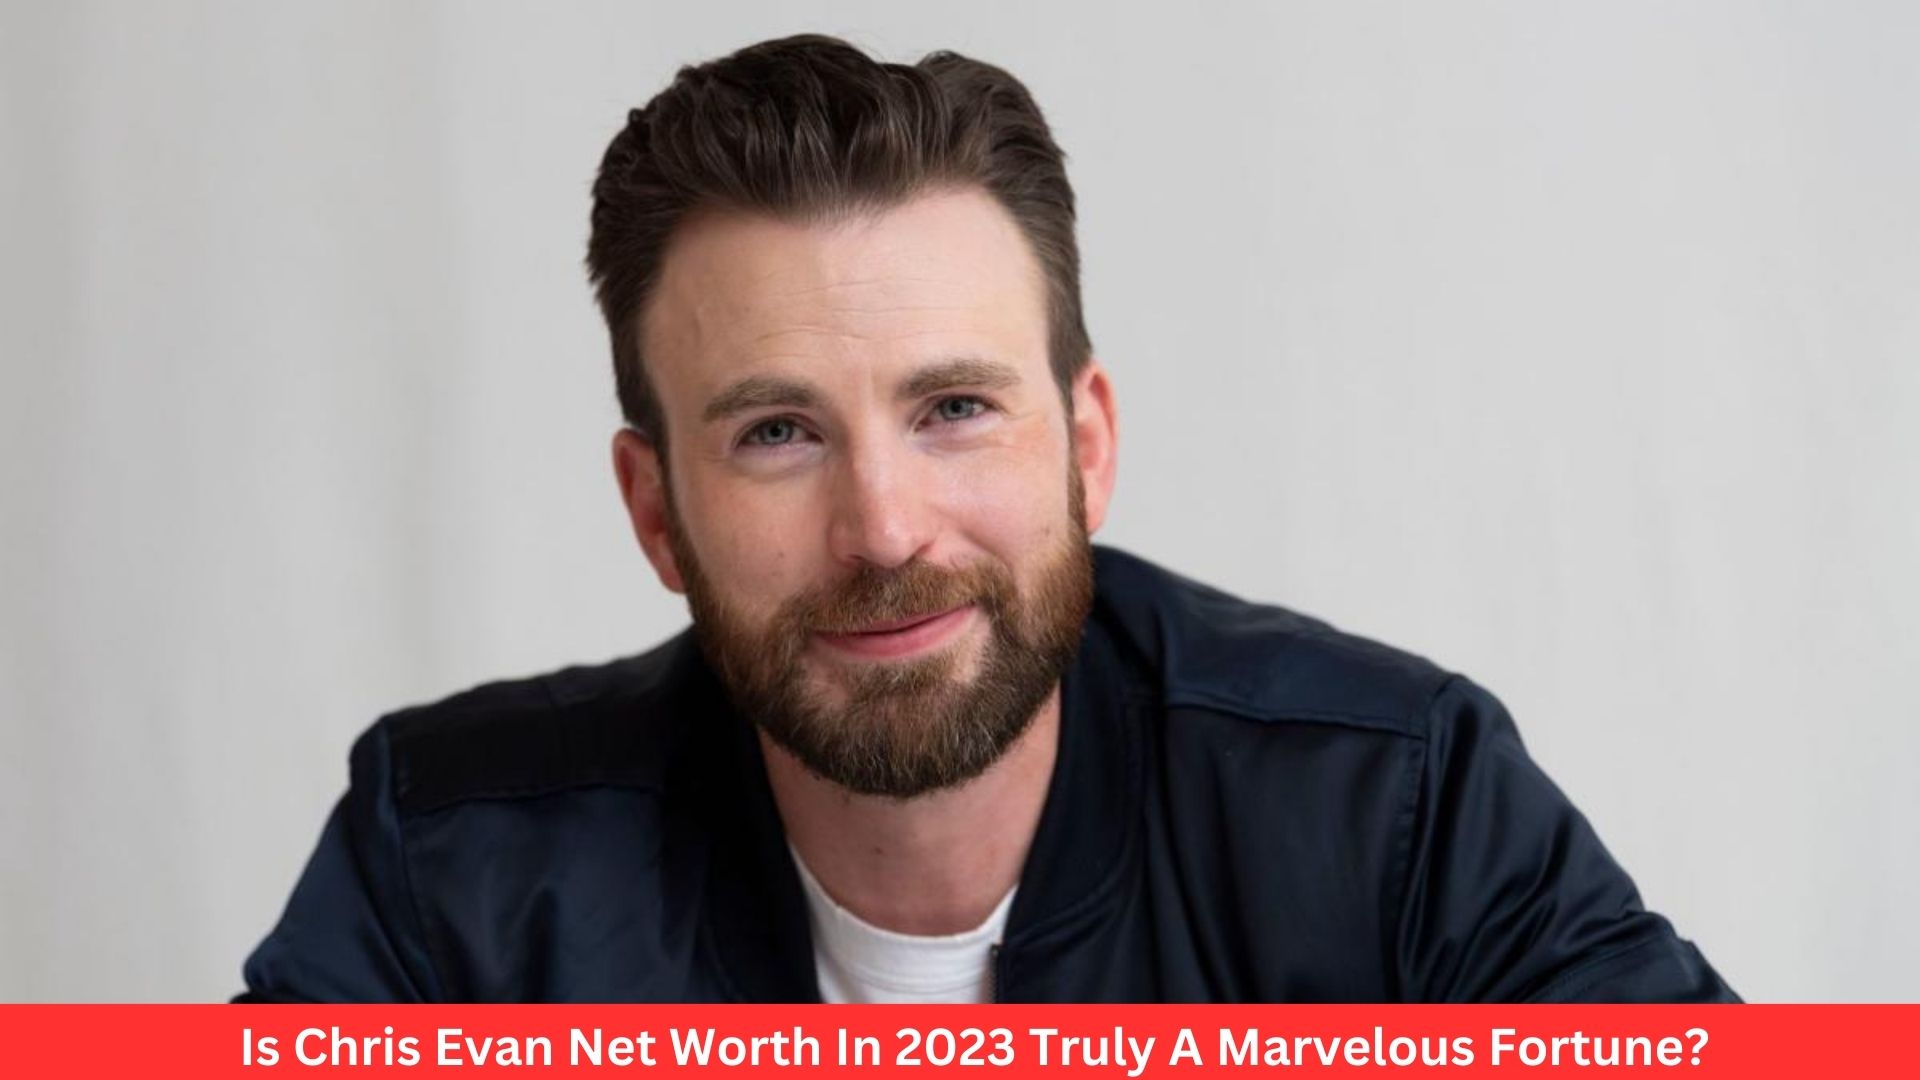 Is Chris Evan Net Worth In 2023 Truly A Marvelous Fortune?